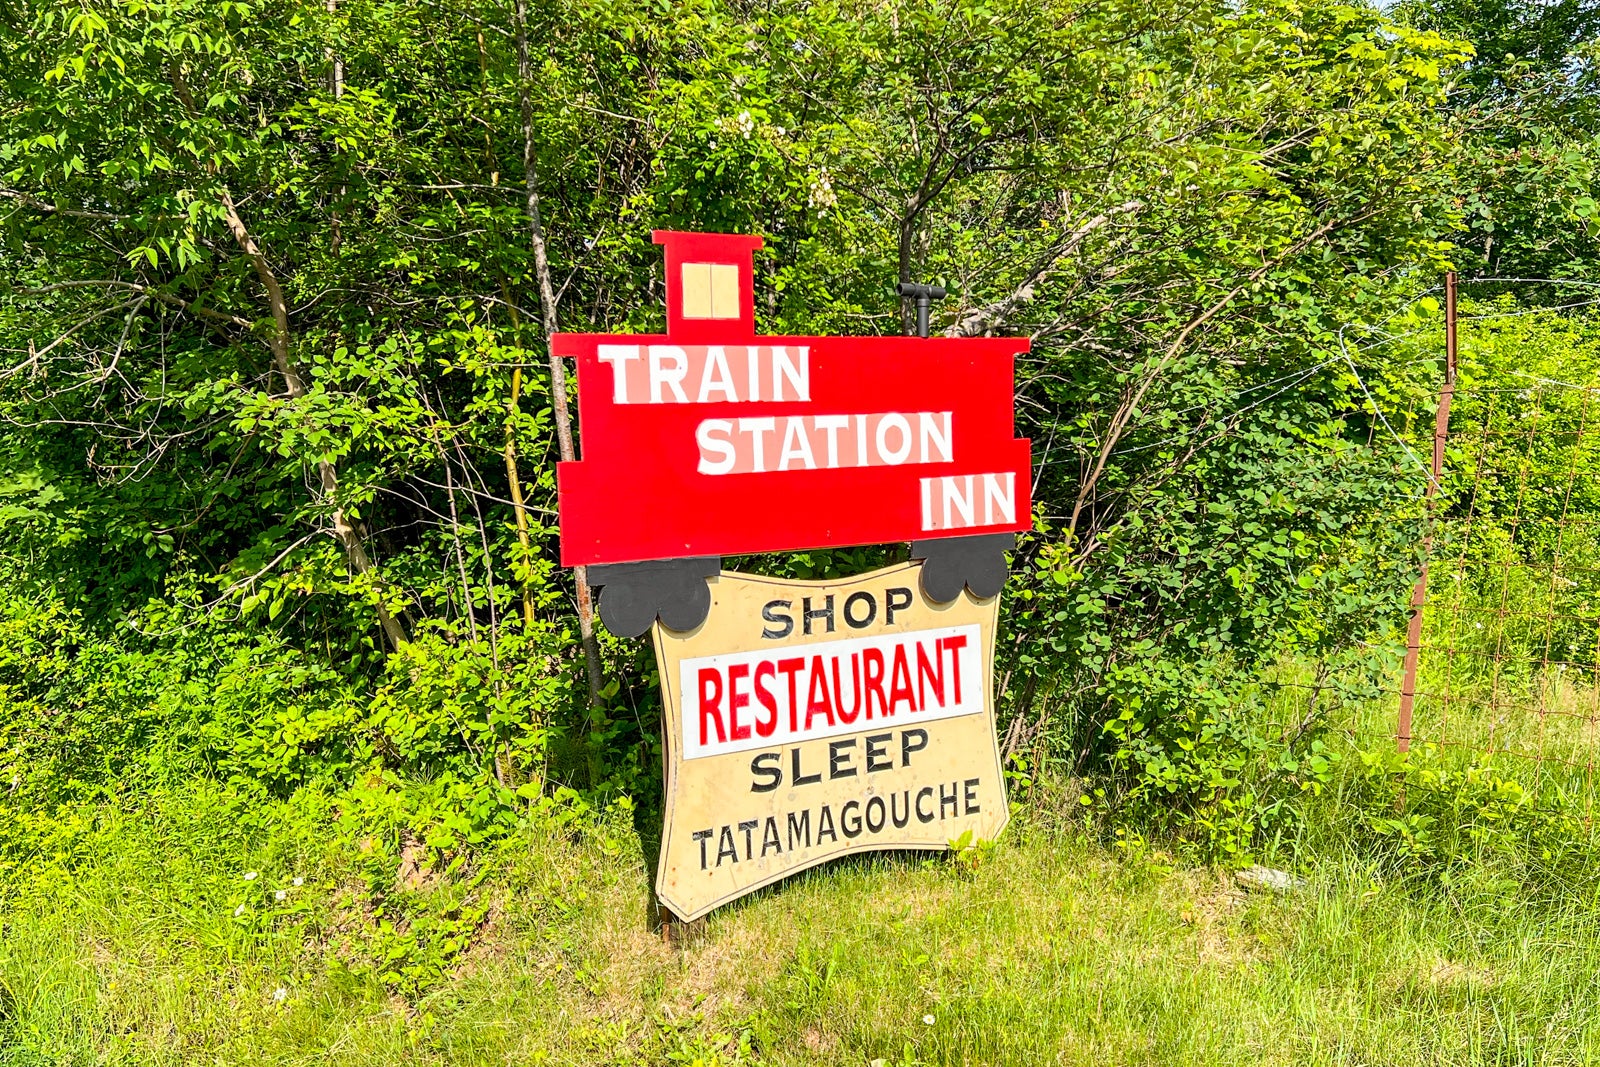 The sign on the road at the Train Station Inn in Tatamagouche, Nova Scotia